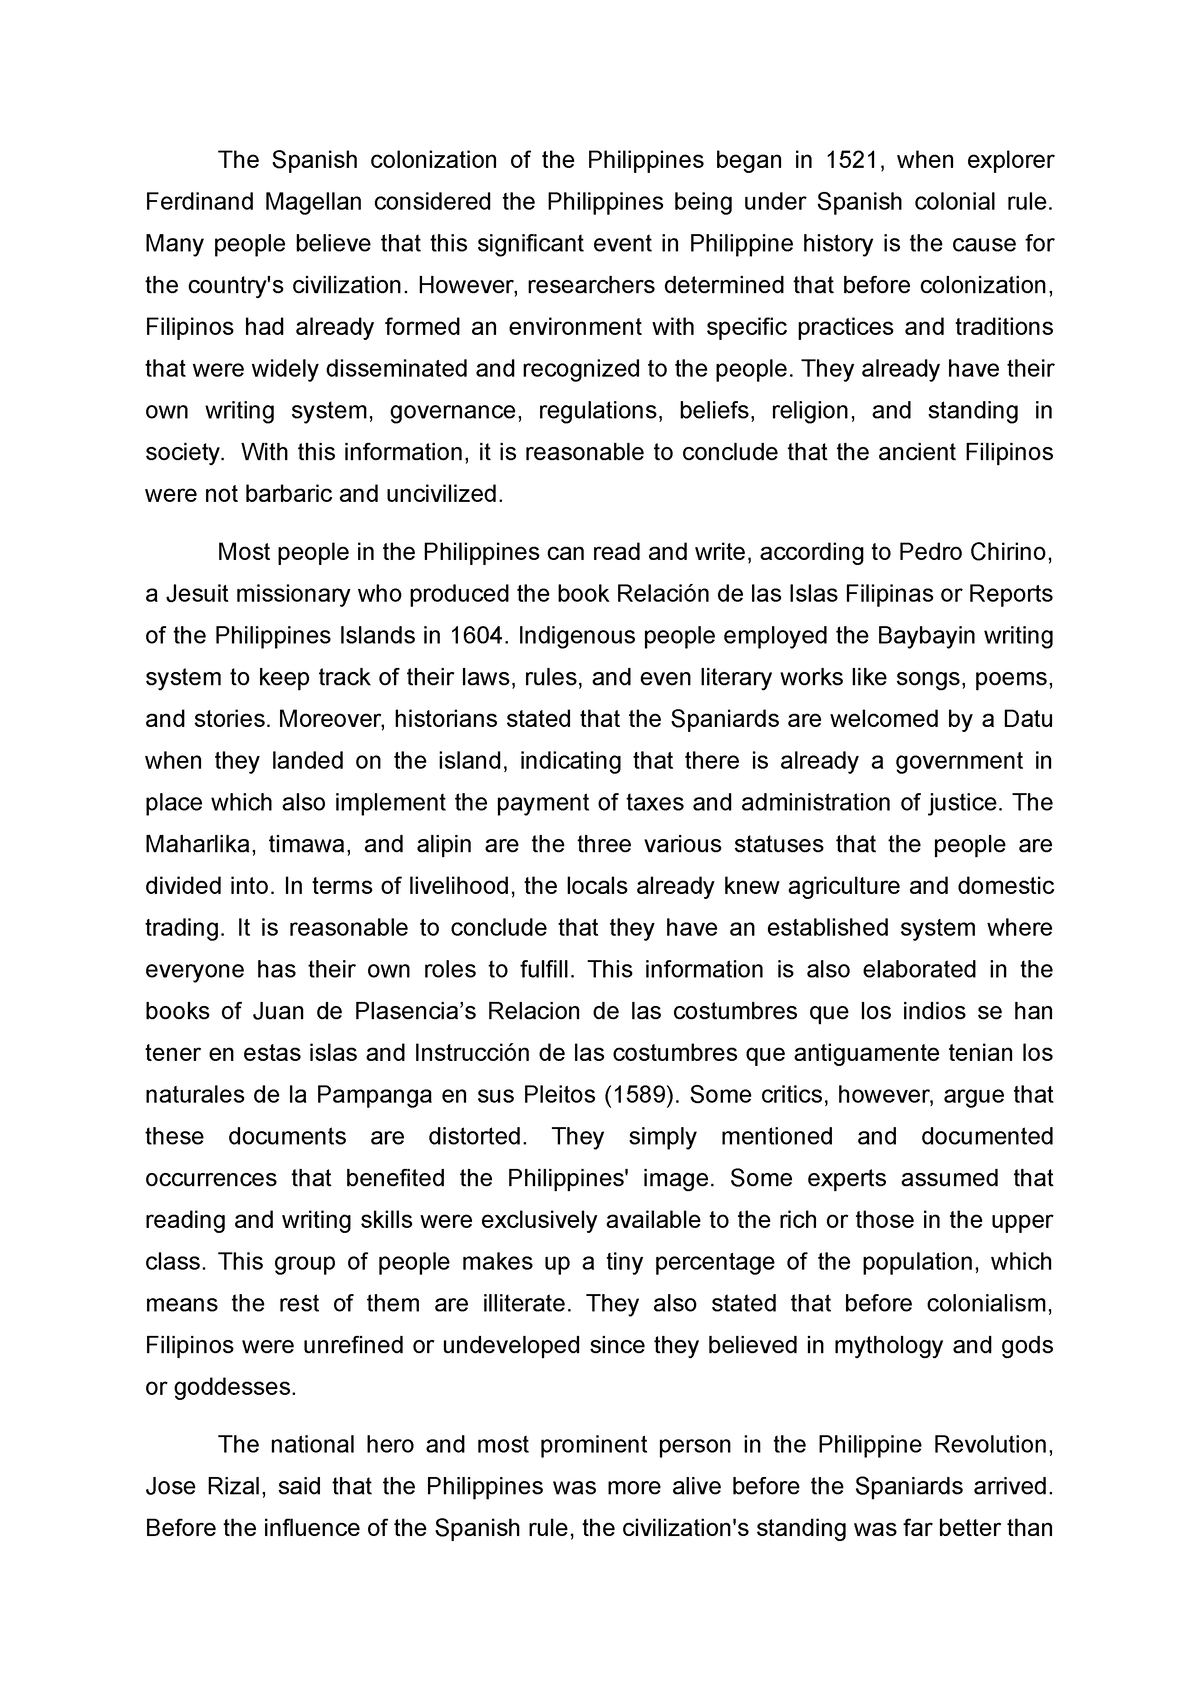 peace process in the philippines essay